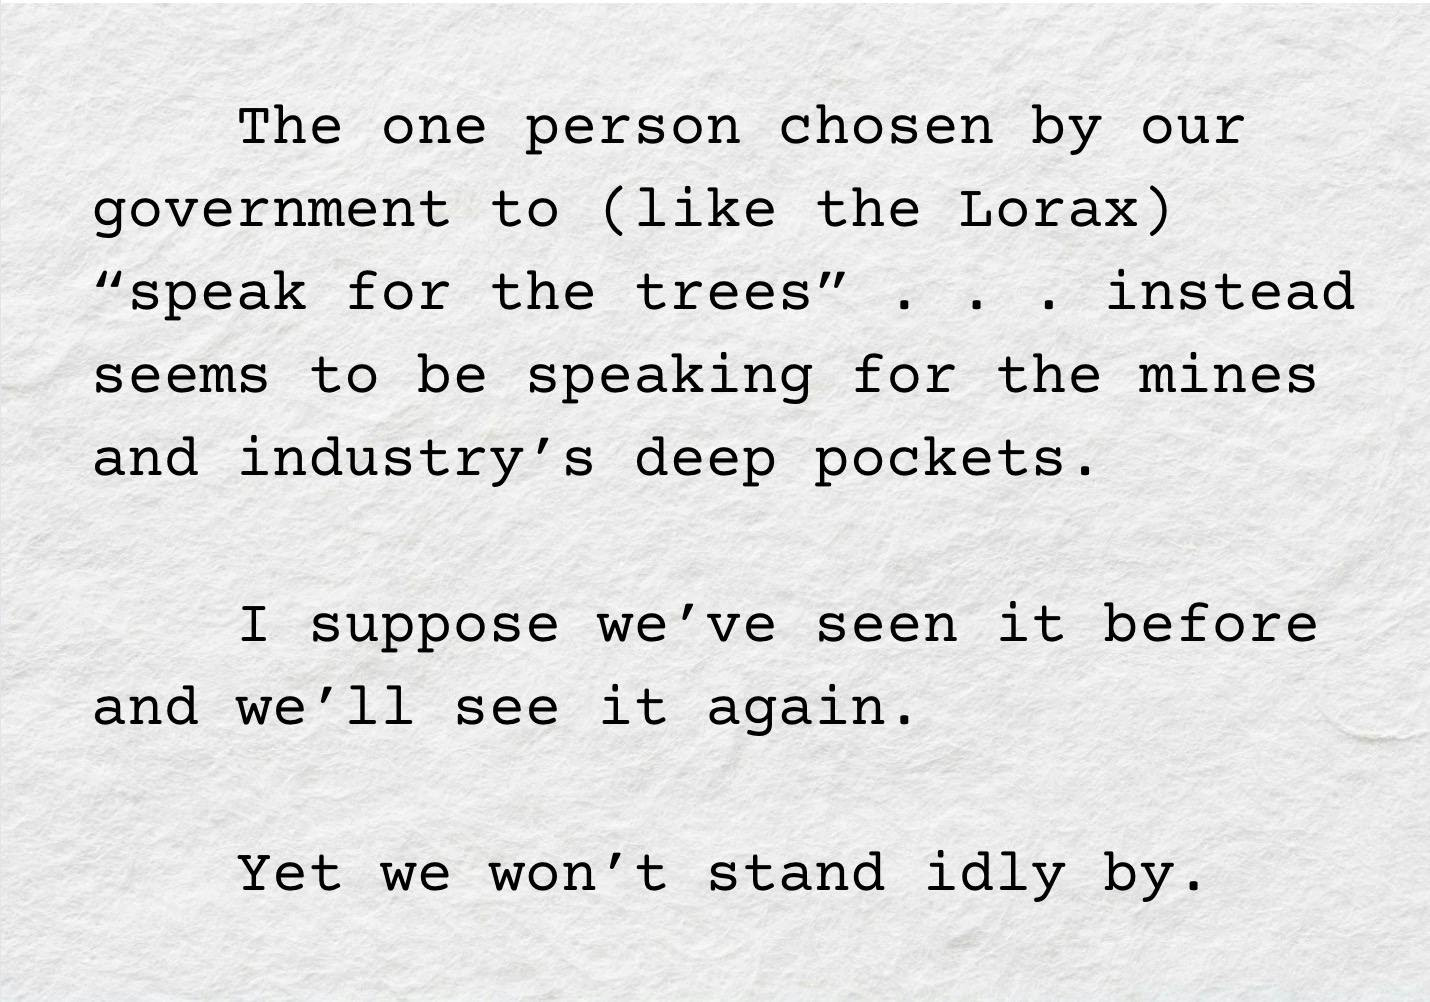 A screenshot of the following text: "The one person chosen by our government to (like the Lorax) “speak for the trees” . . . instead seems to be speaking for the mines and industry’s deep pockets. 	I suppose we’ve seen it before and we’ll see it again. 	Yet we won’t stand idly by. "